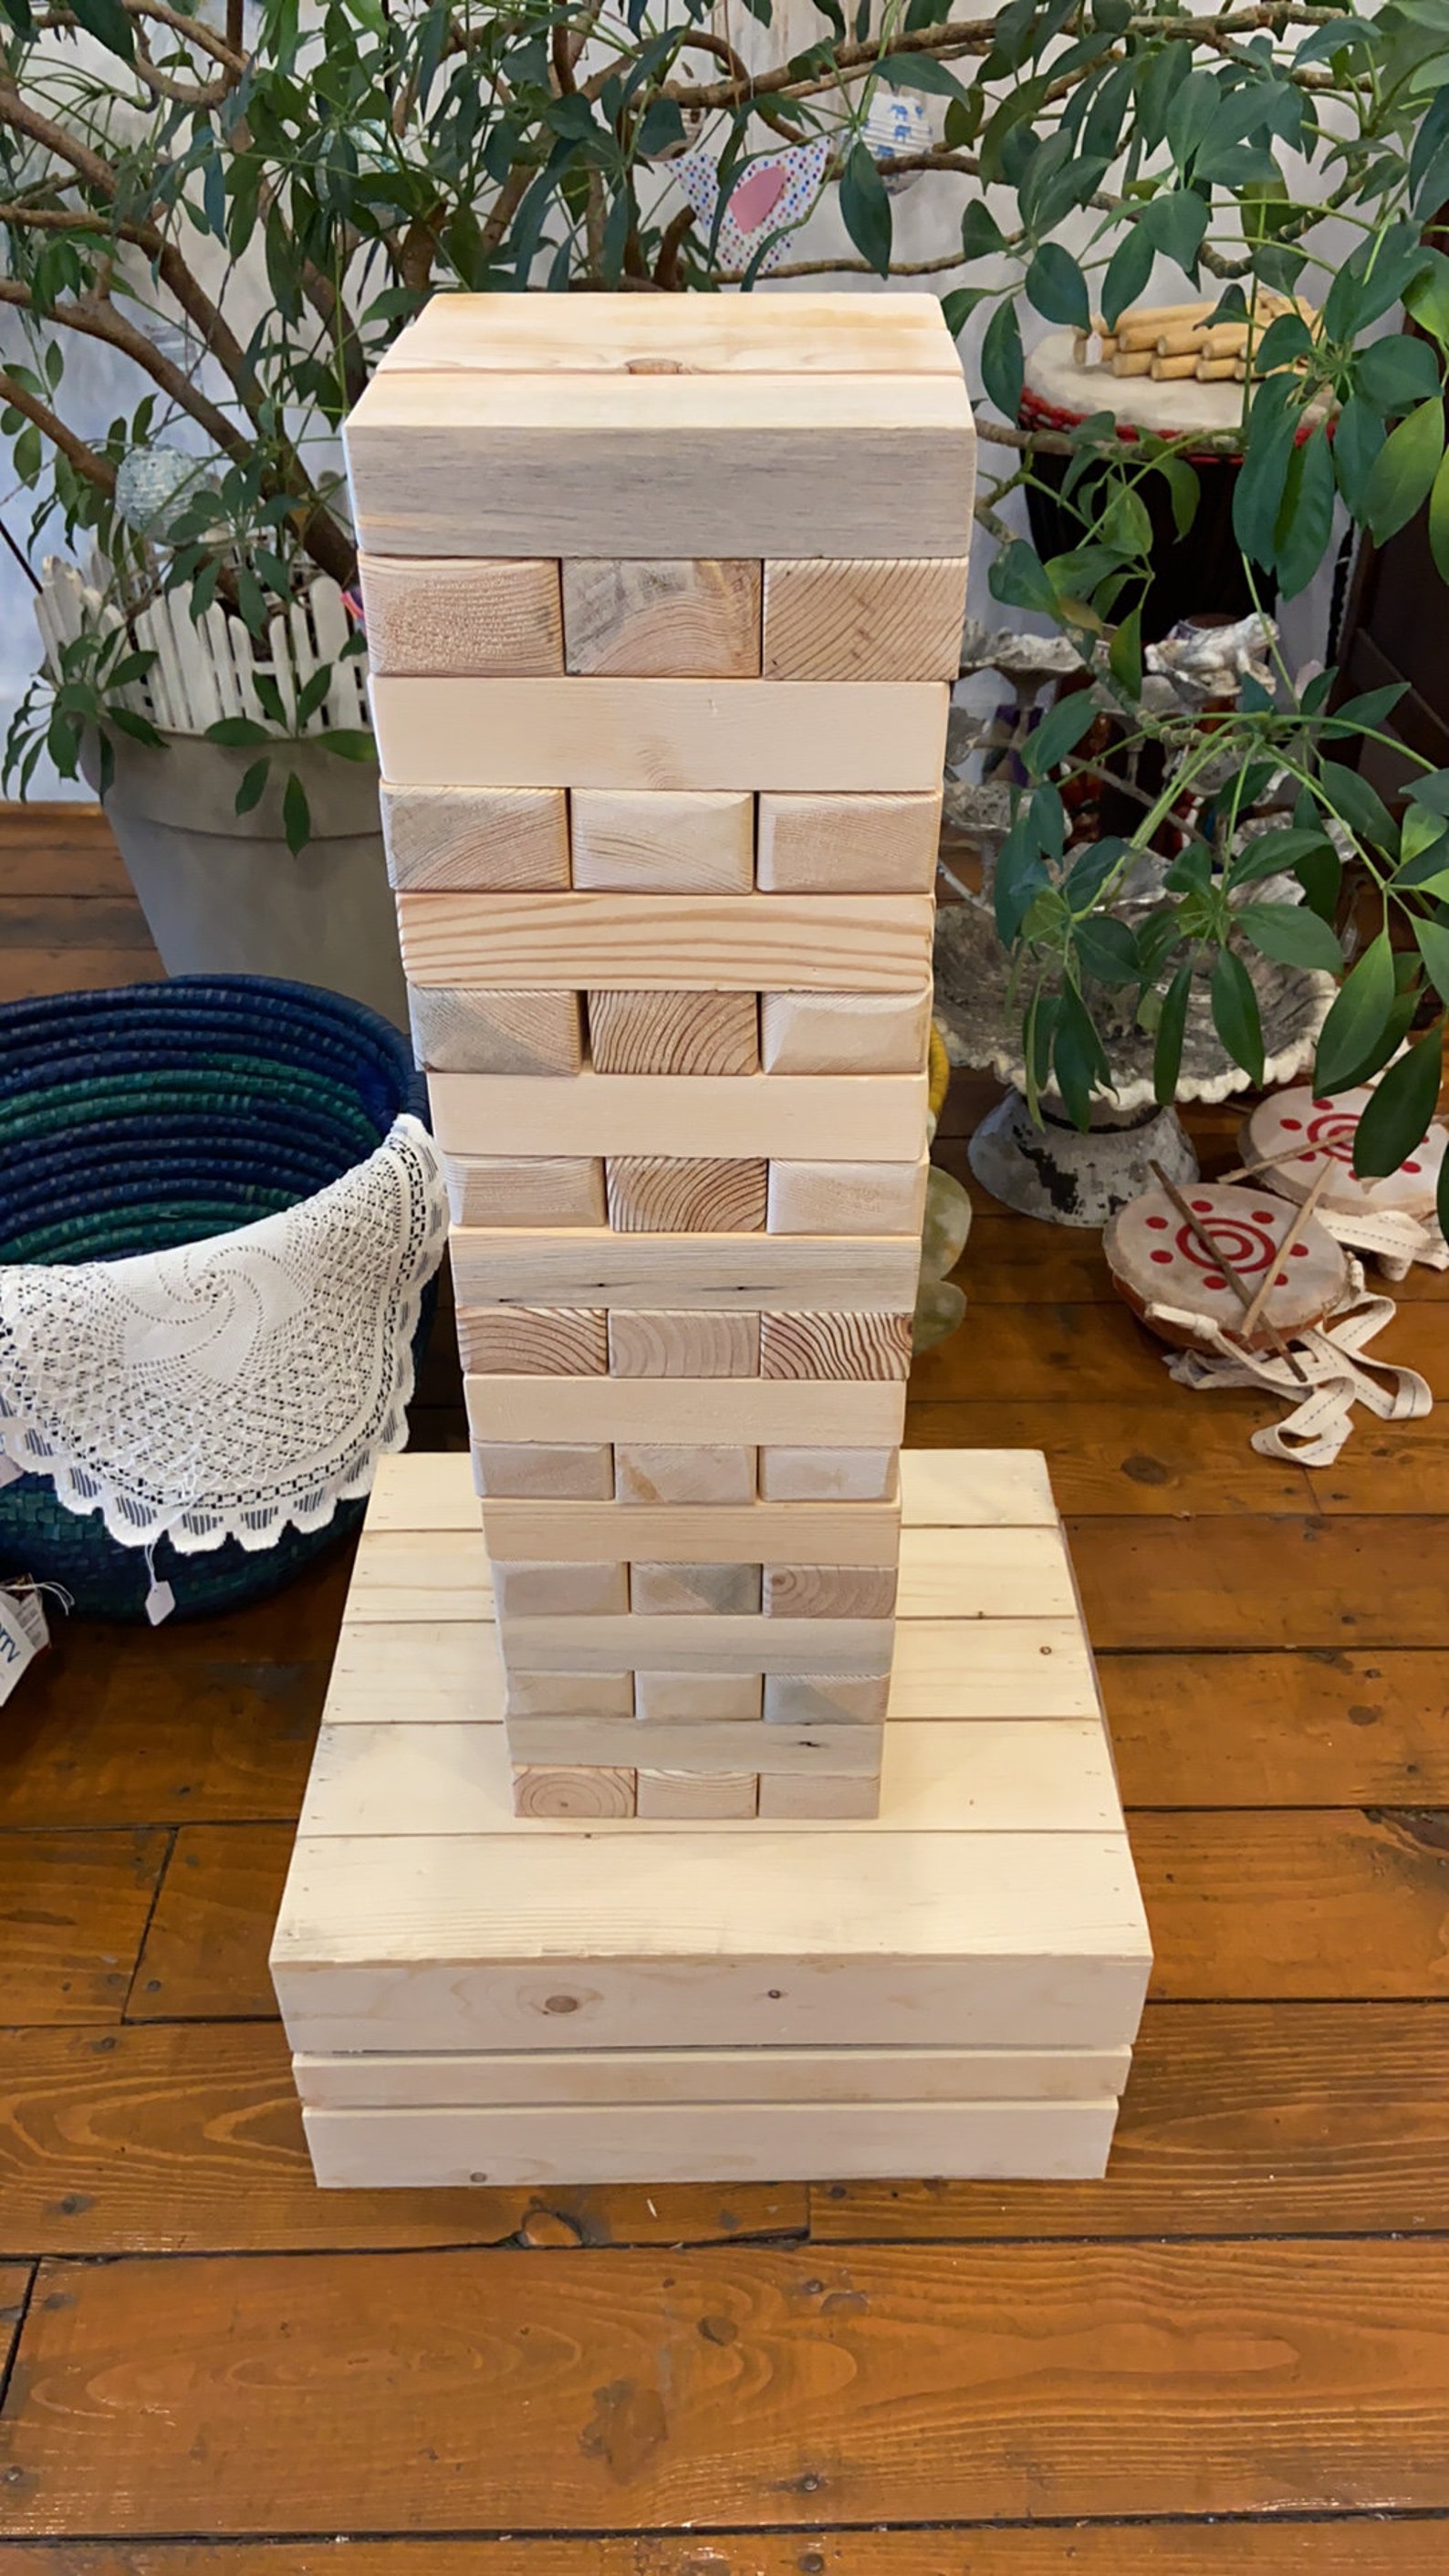 Giant Wooden Jenga Lawn Yard Game with Storage Crate 